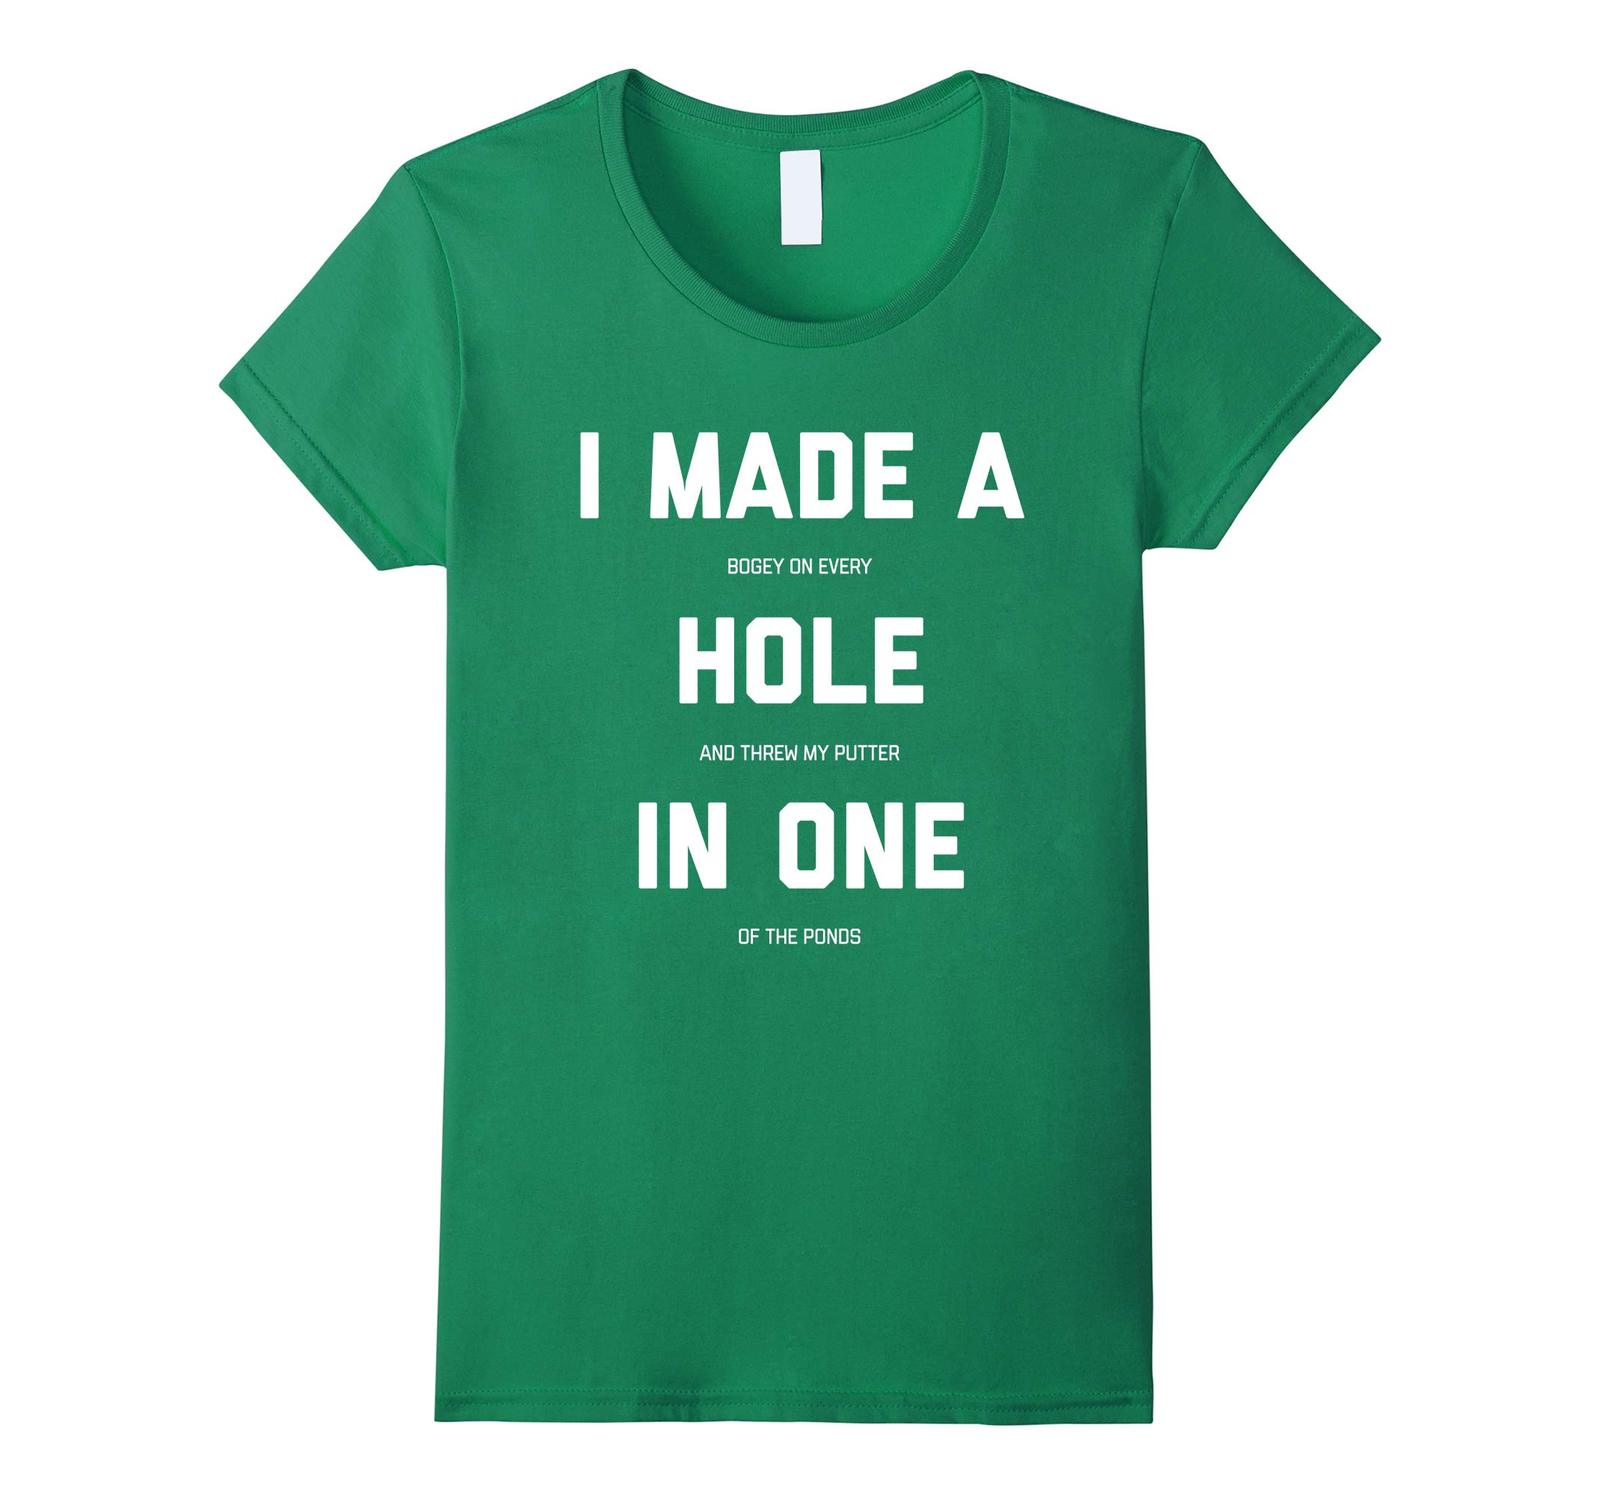 New Tee - Funny Golf Shirts For Men Women - Hole In One Golf Gag Gifts ...